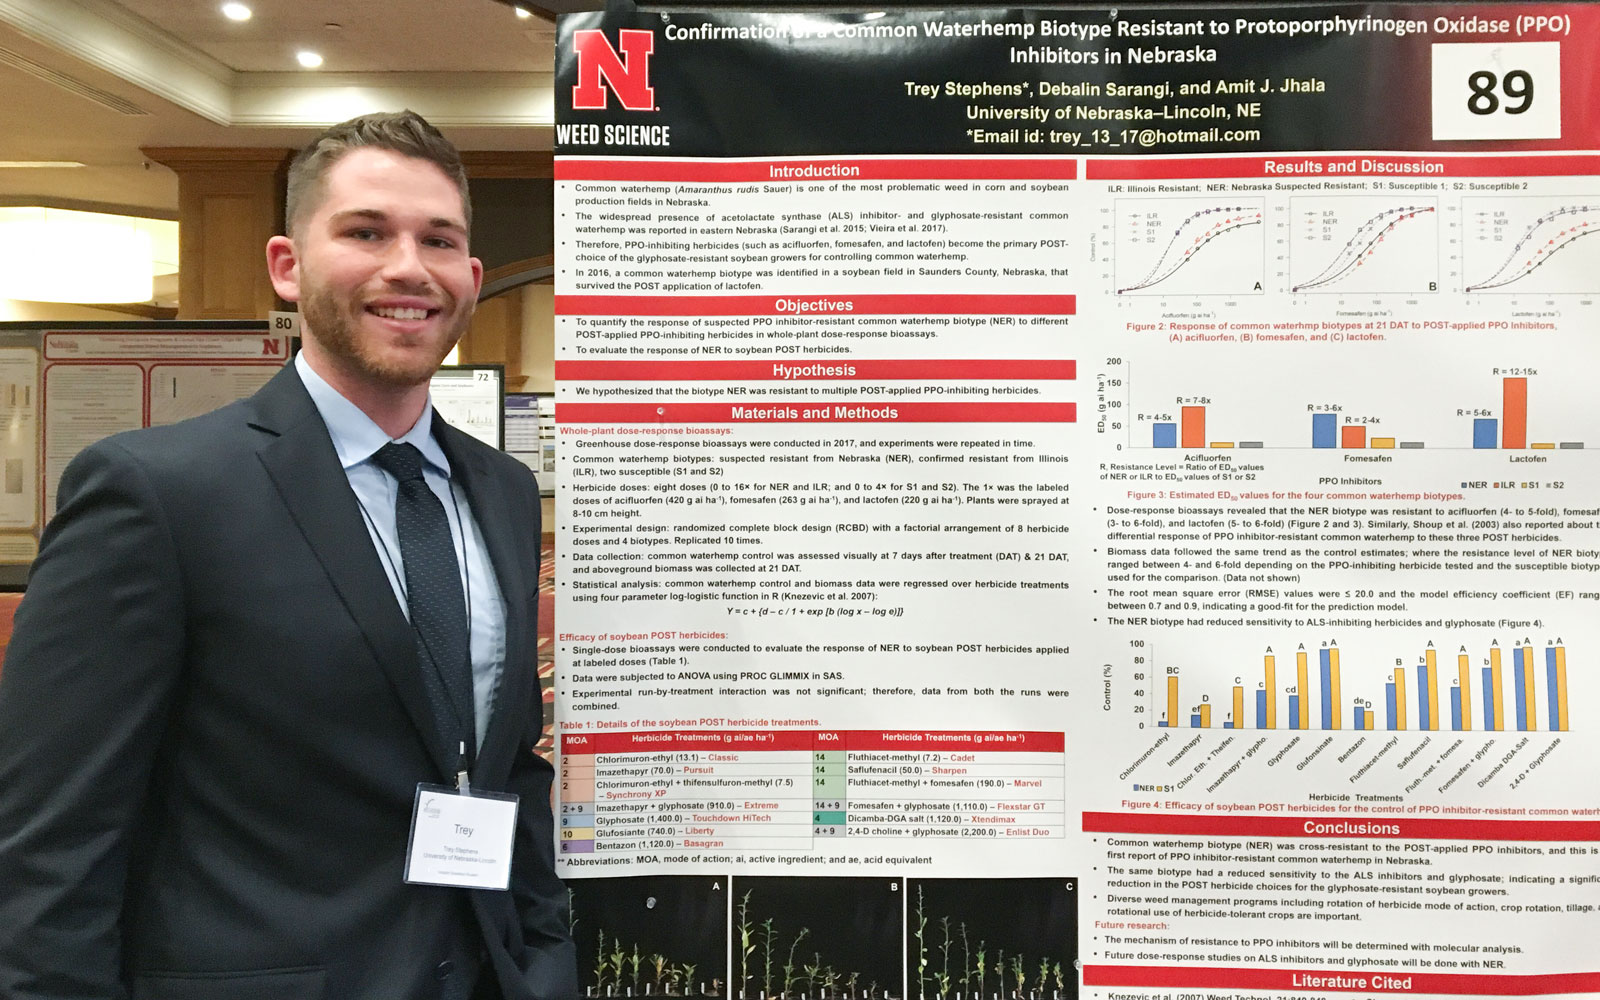 Trey Stephens received first place in the NCWSS Agronomic Crops undergraduate poster contest.